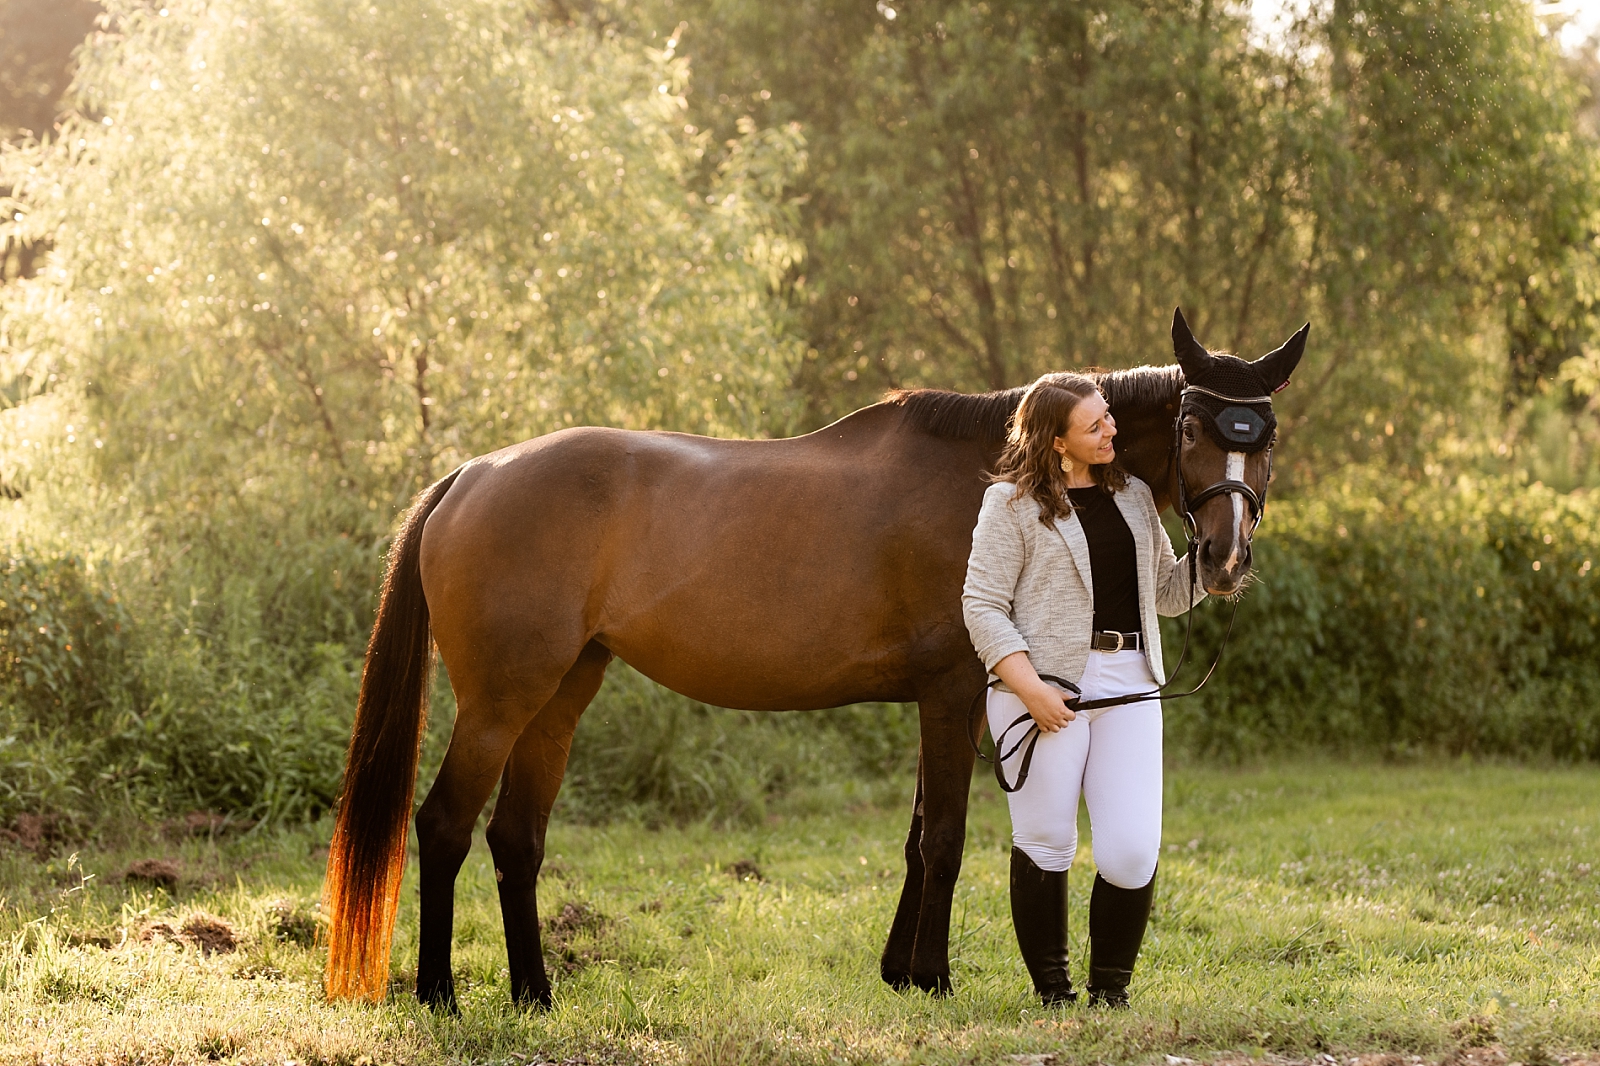 Horse and rider photoshoot near Atlanta, Georgia. Eventing rider photographed with her horse in Atlanta. Horse photographer near Atlanta, GA.